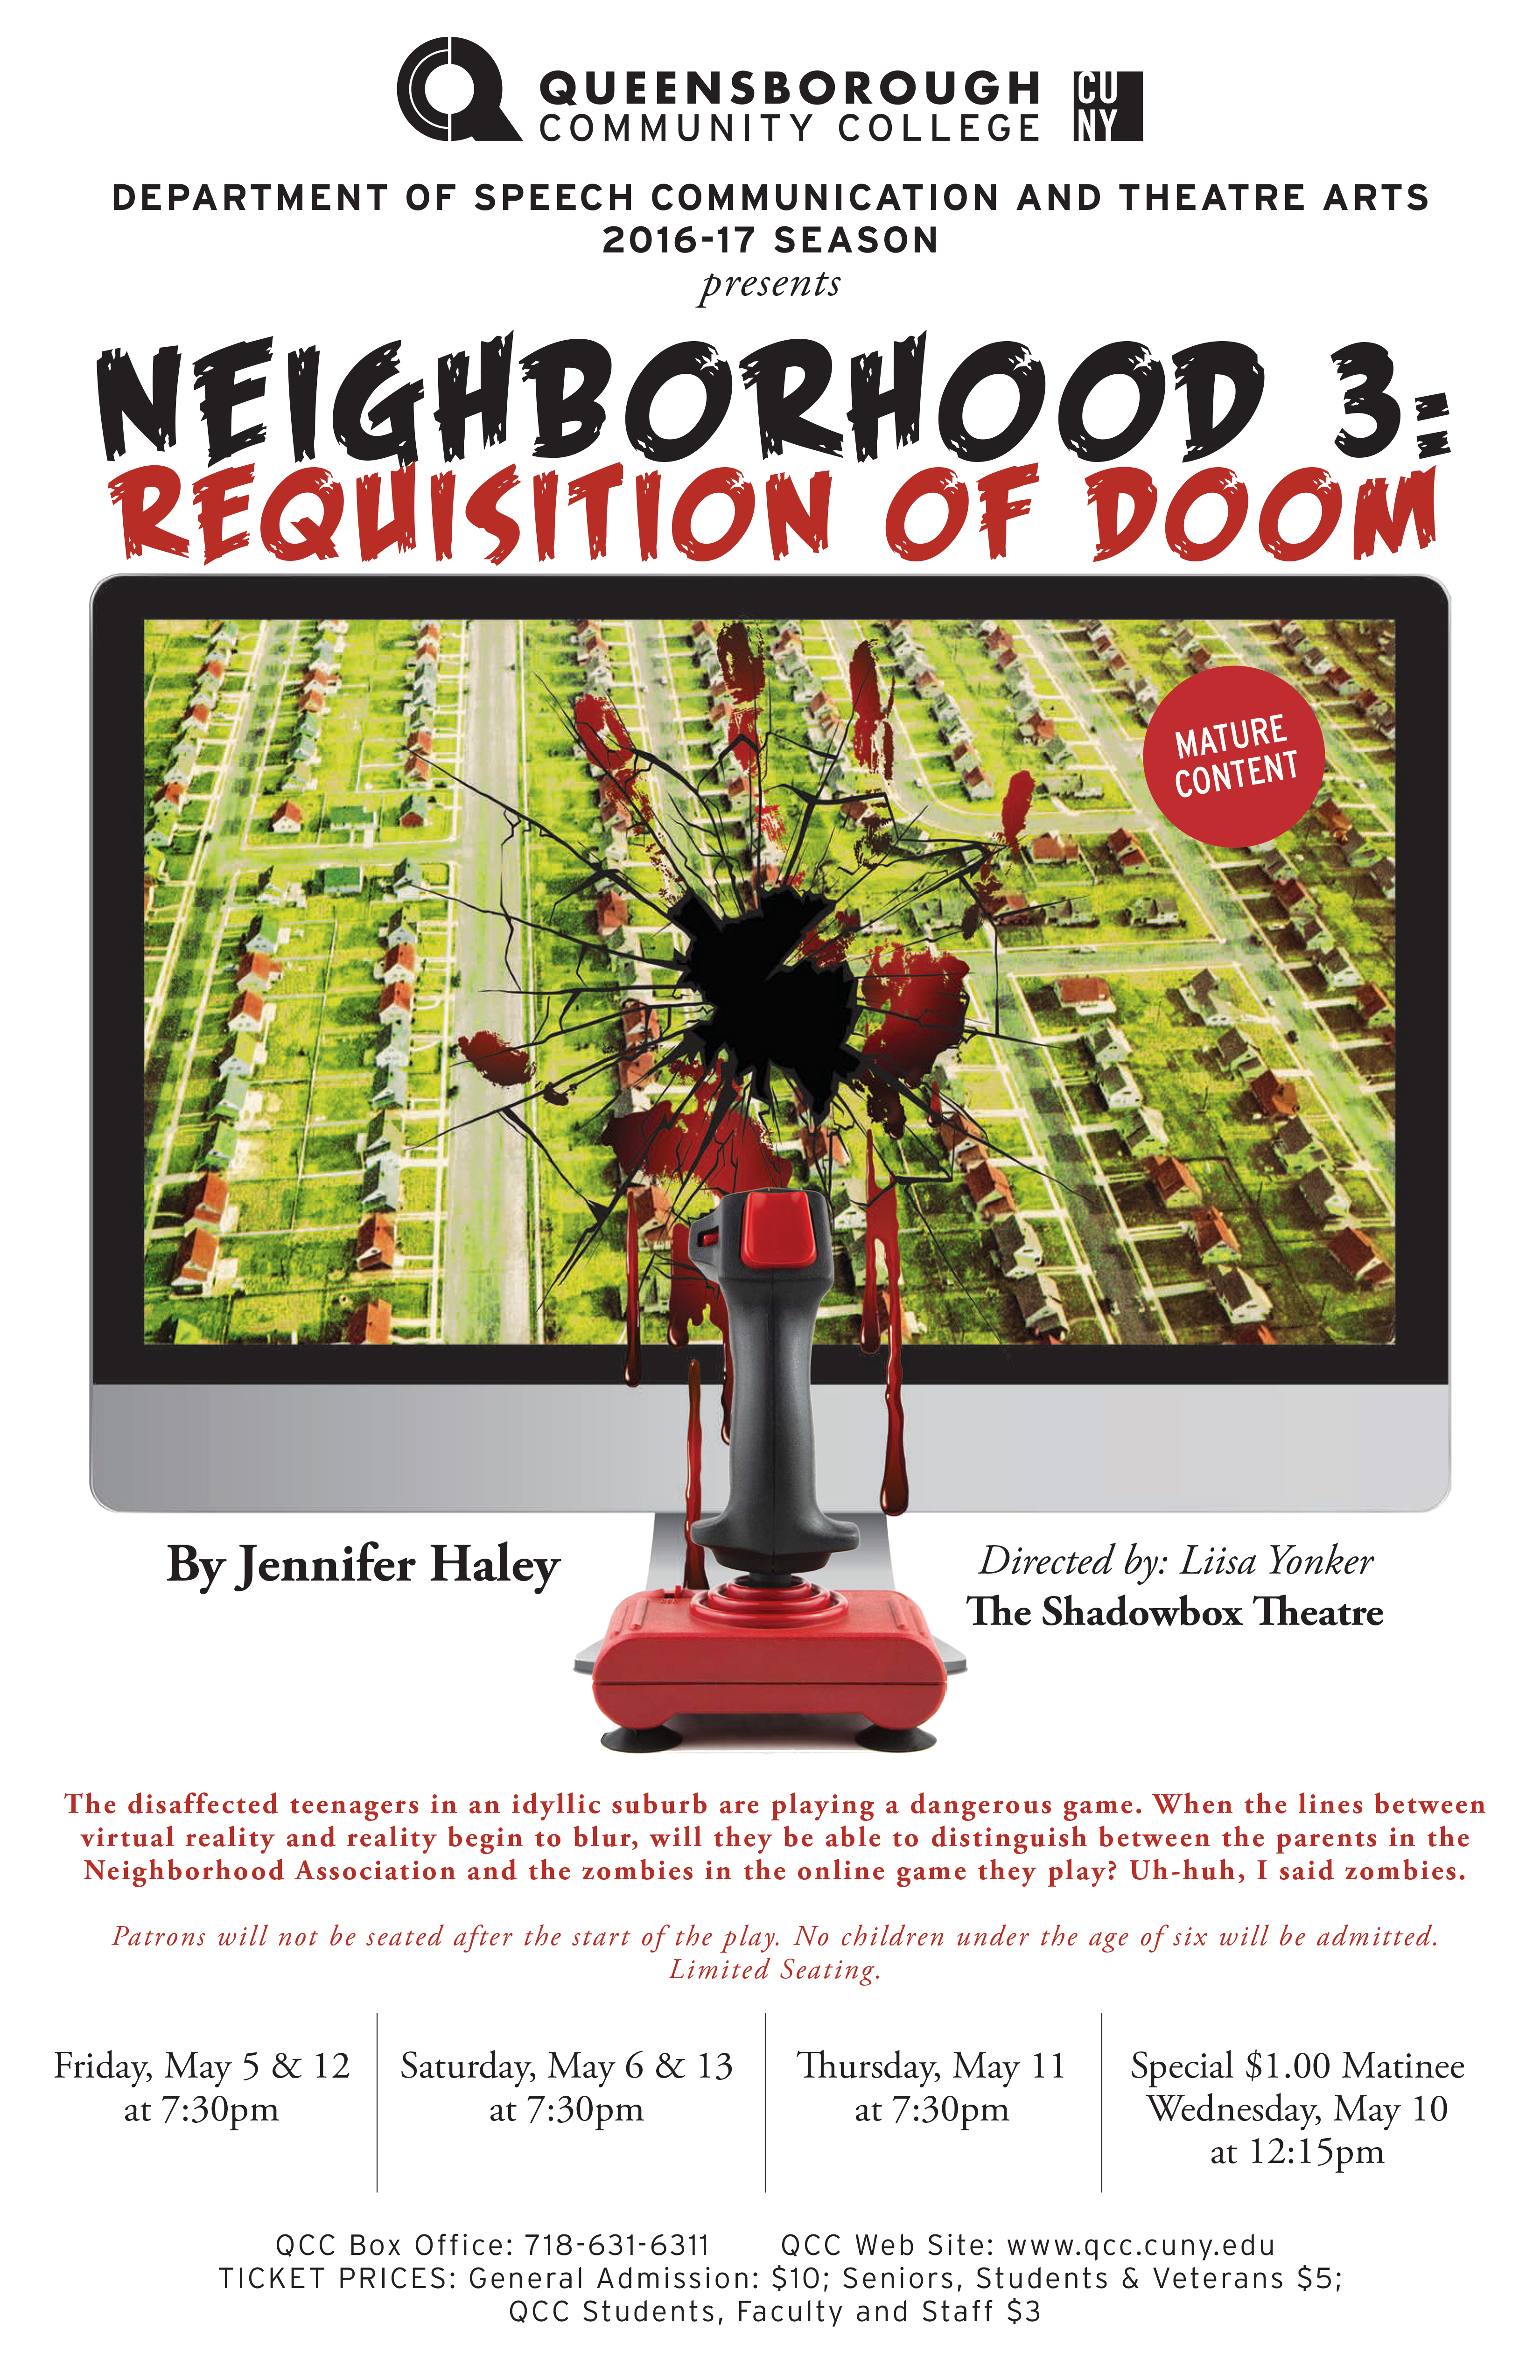 This is a poster for the past spring 2017 production of ‘Neighborhood 3: Requisition of Doom’, written by Jennifer Haley, and directed by Professor Yonker. The poster displays picture frames against a red velvet wall and a creepy hand coming from behind the armchair.